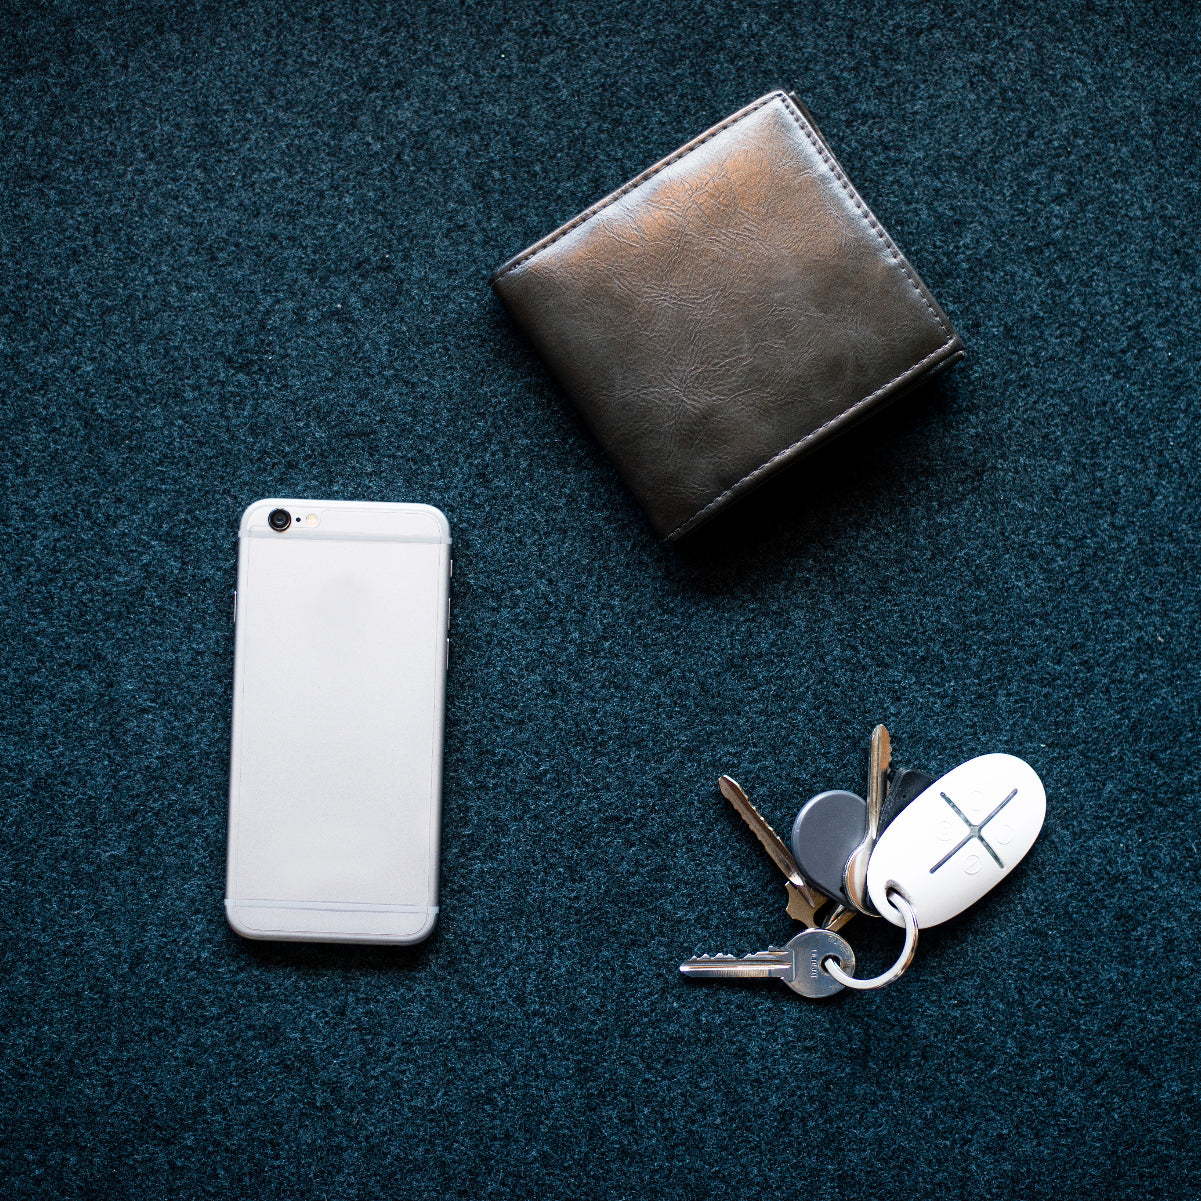 White AJAX SpaceControl on a keychain shown with keycard and wallet